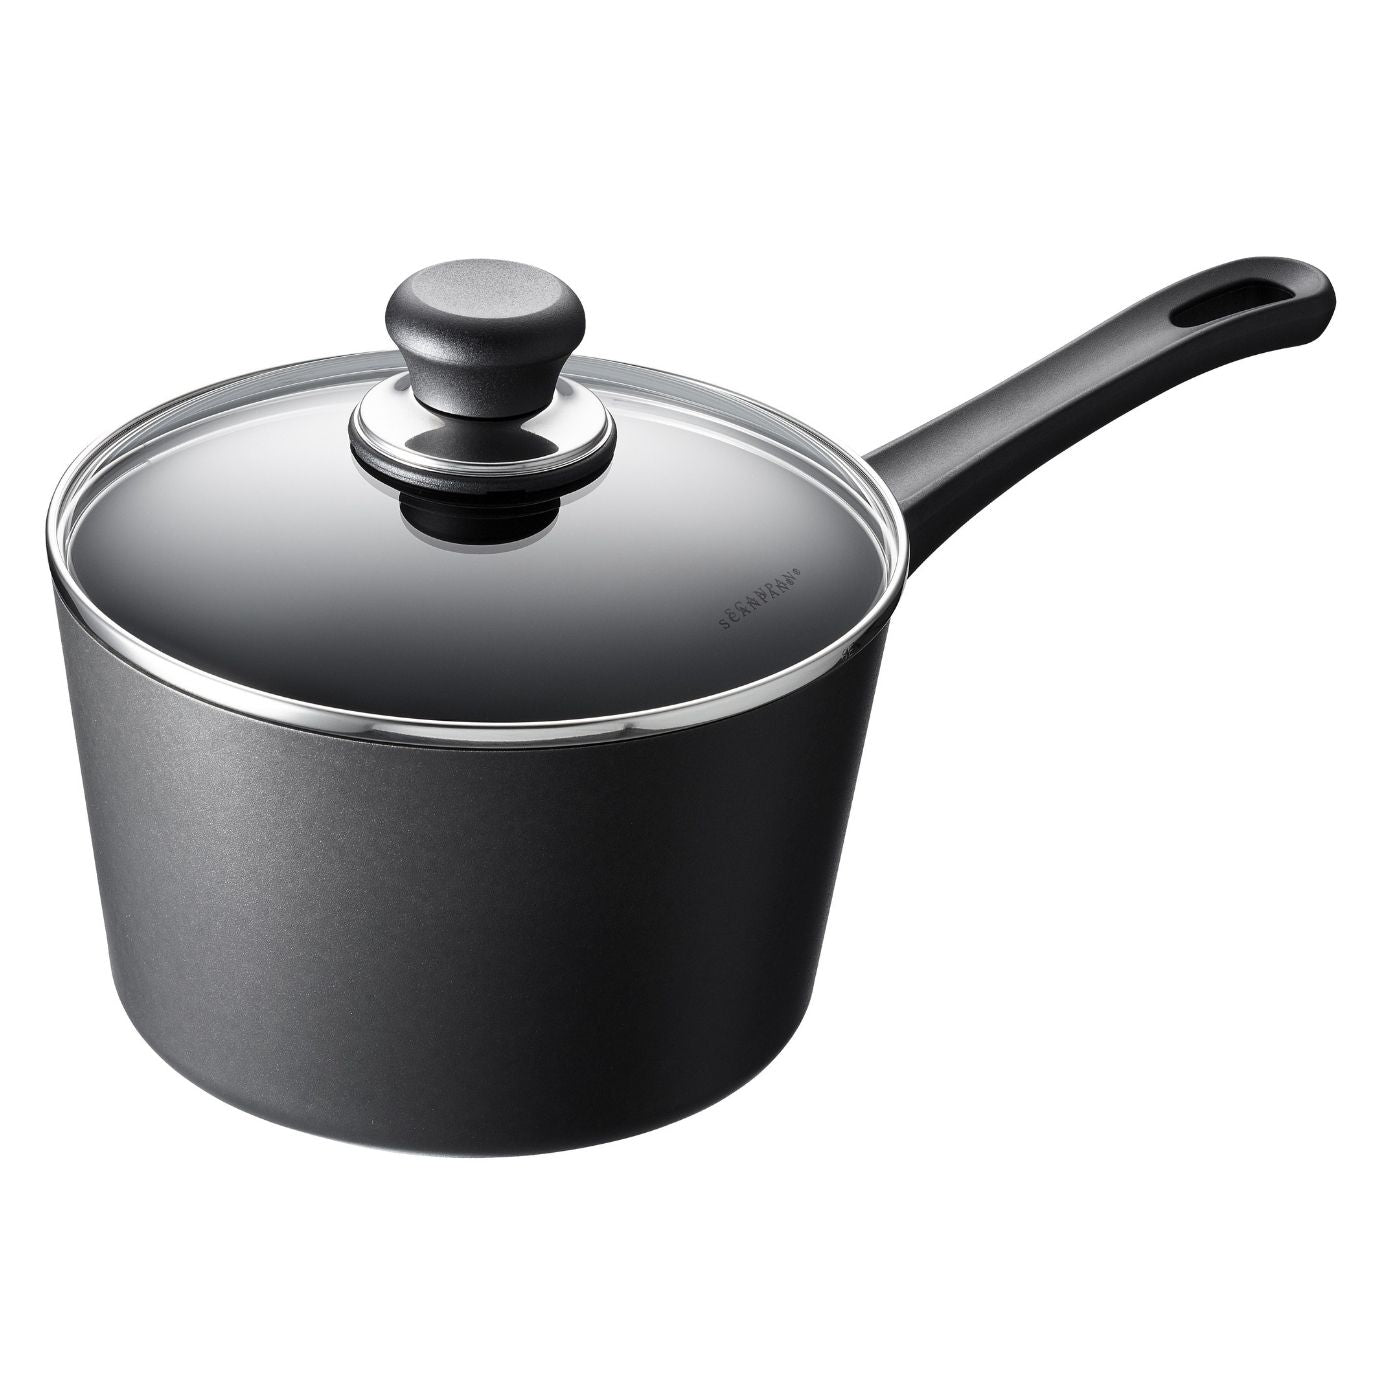 Scanpan Non Stick Classic Induction Saucepan with Glass Lid - 20cm